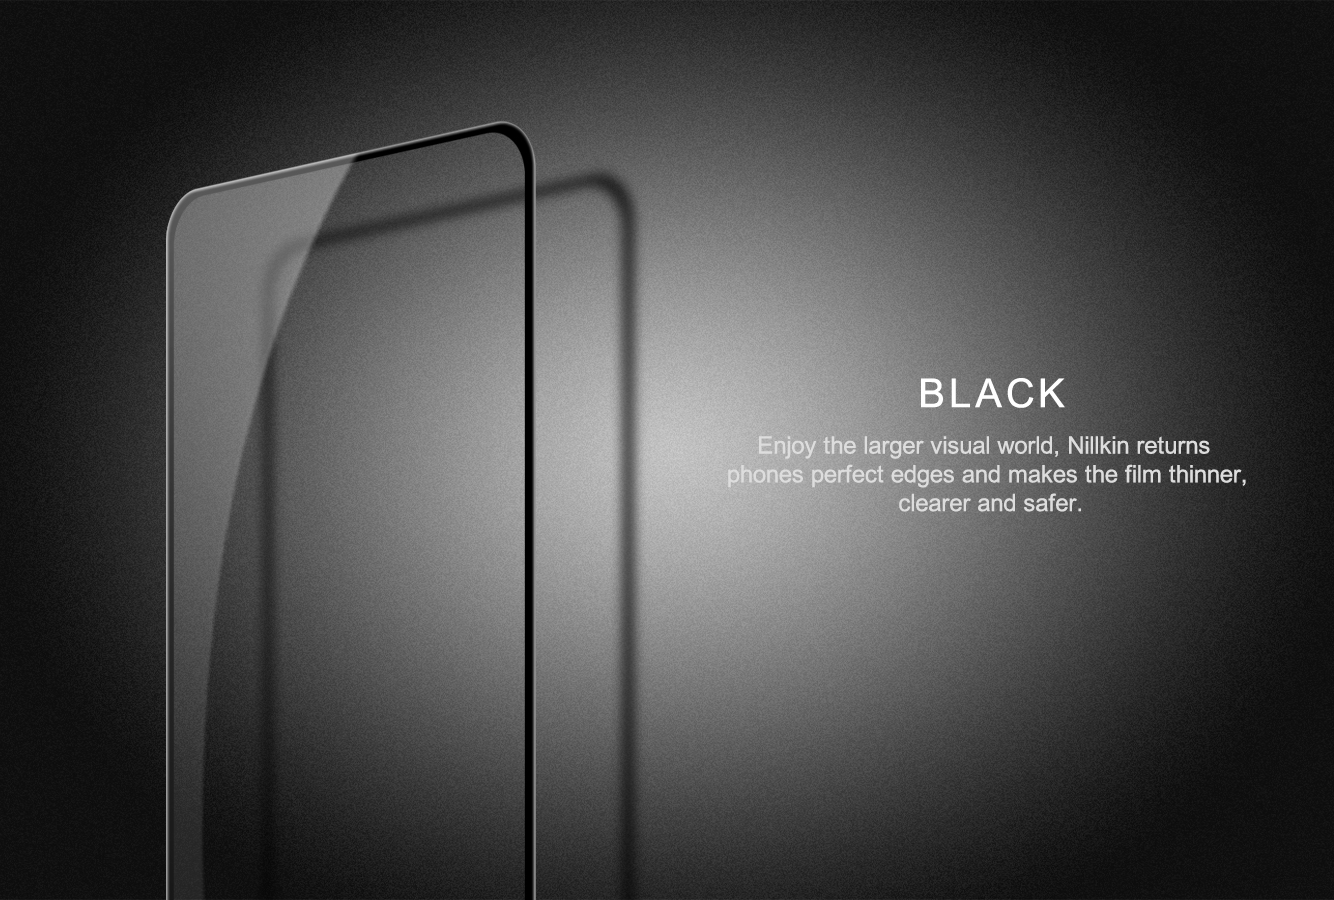 OnePlus Nord CE 3 Lite Tempered Glass